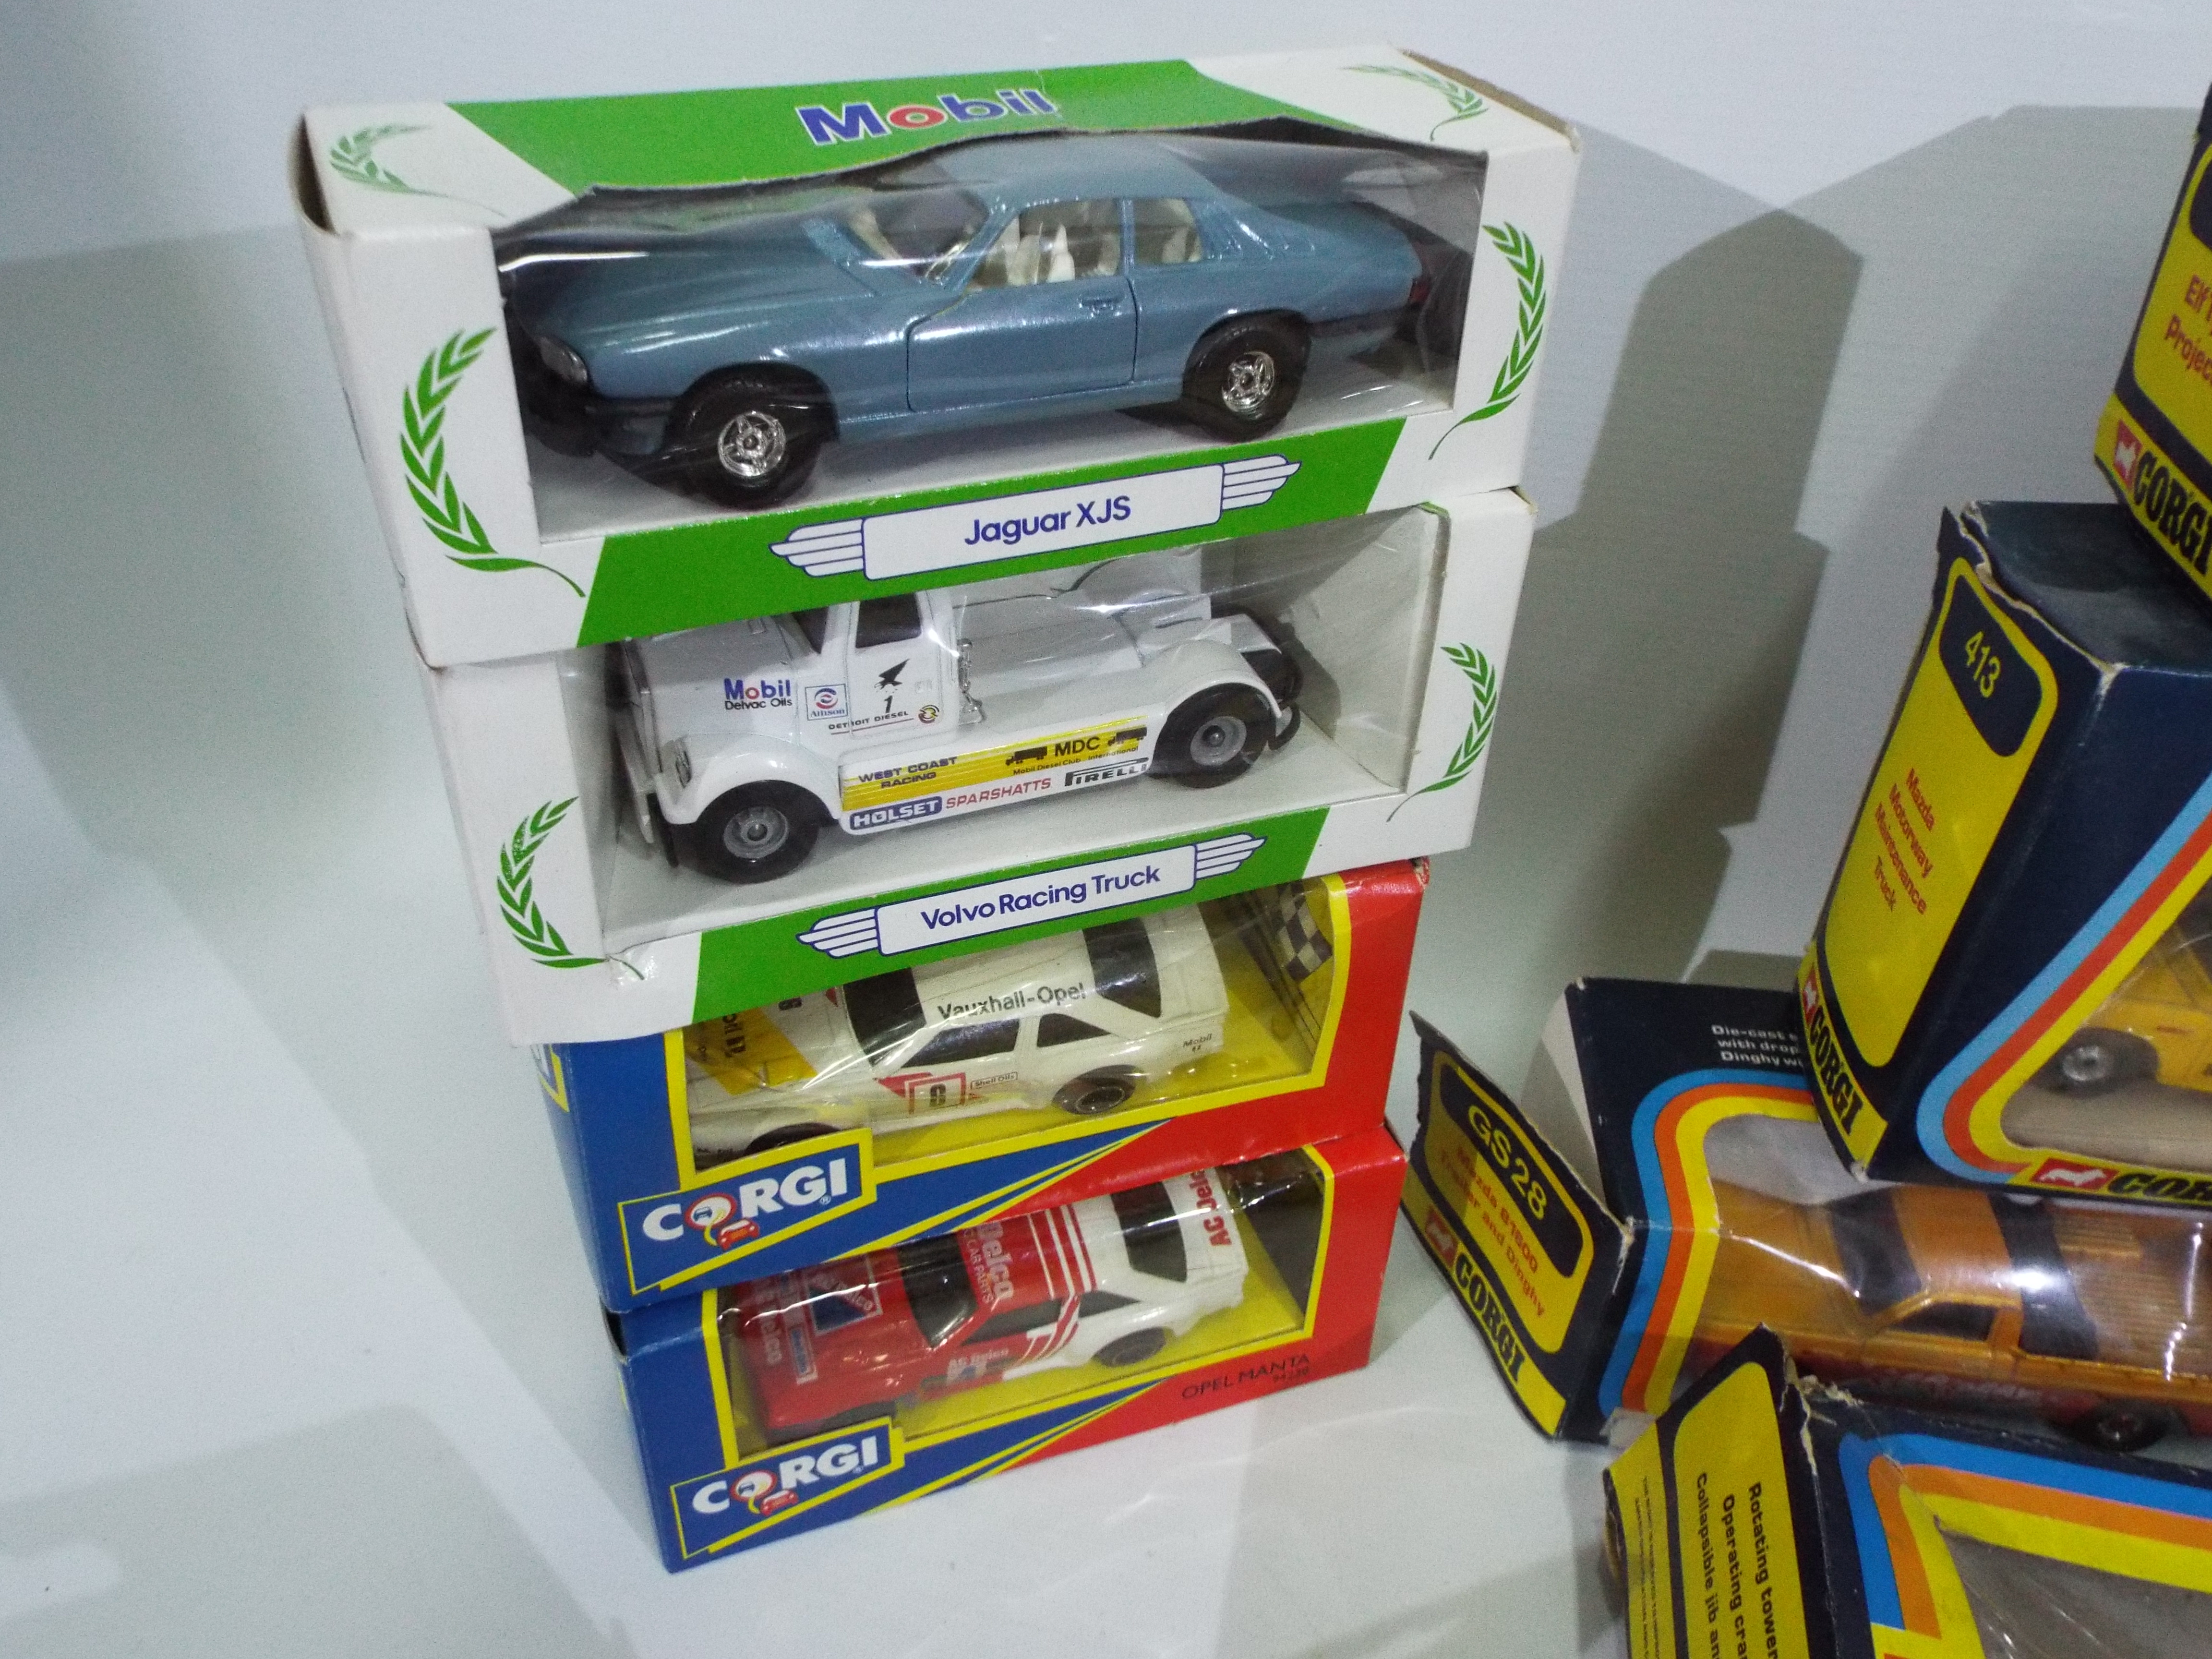 Corgi - 16 x boxed die-cast Corgi vehicles - Lot includes a 320 Ford Mustang, - Image 4 of 7